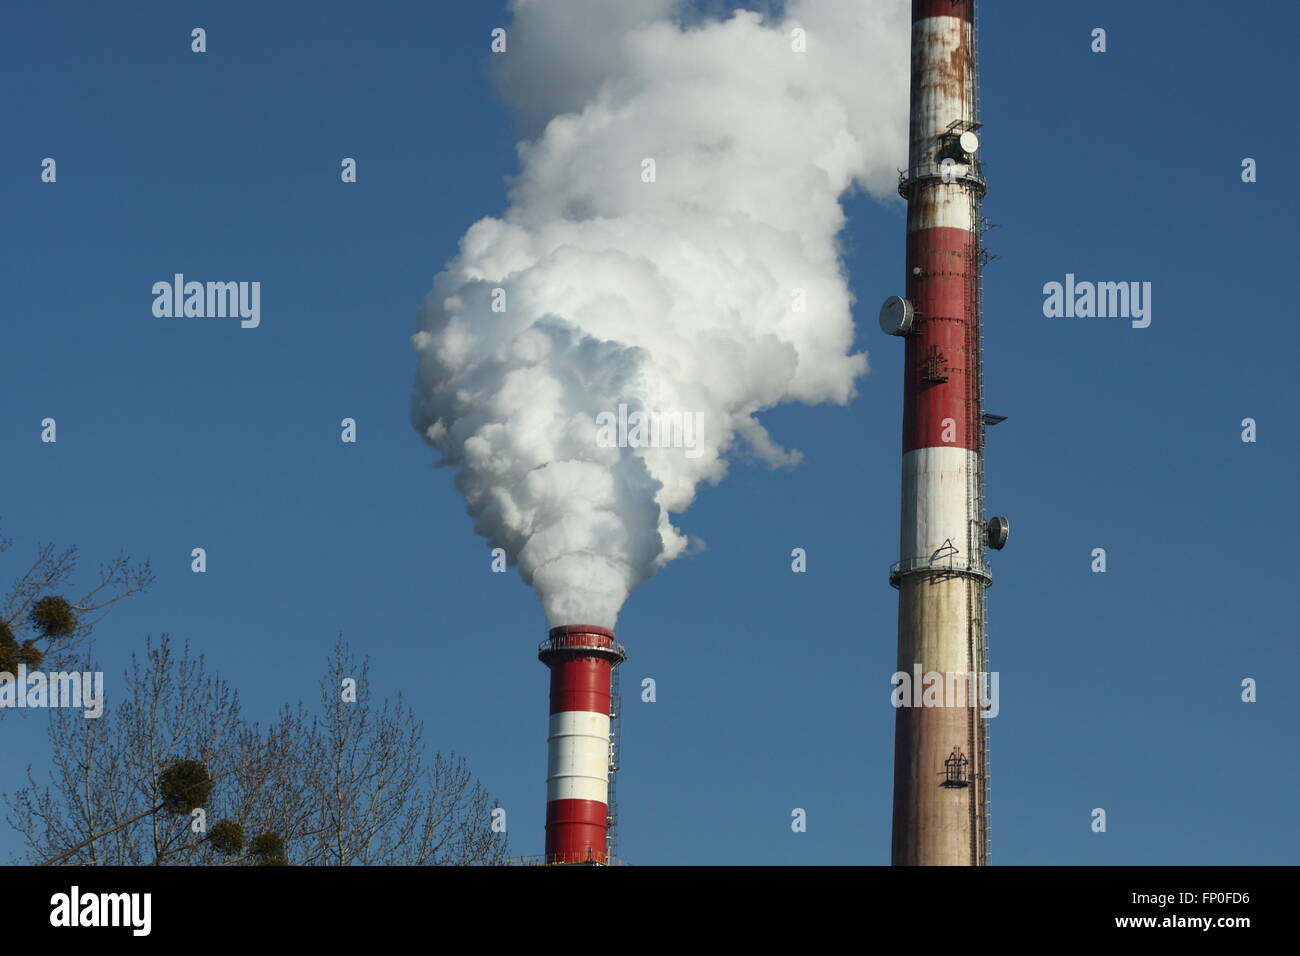 Gdansk, Poland 16th, March 2016 WHO (World Health Organization) says nearly a quarter of all deaths in 2012 were caused by environment-related factors such as air, water, and soil pollution, as well as unsafe roads and stressful work environments. Pictured: Smoking chimneys ow Gdansk power plant. Credit:  Michal Fludra/Alamy Live News Stock Photo